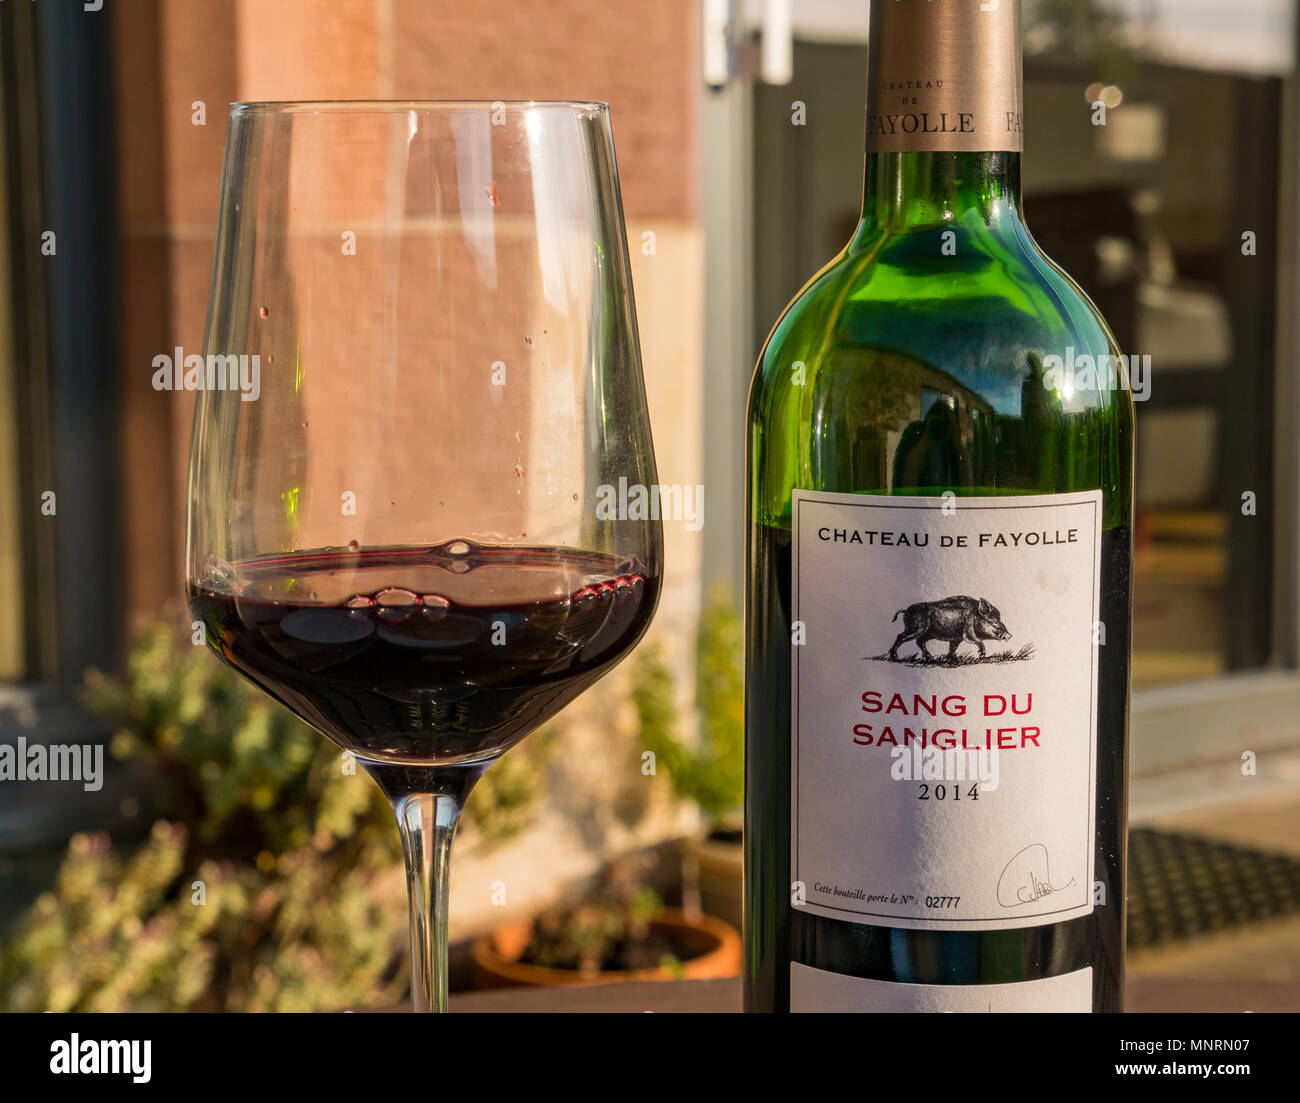 A bottle of French fine red wine, Sang du Sanglier 2014, Chateau de Fayolle, with wine in glass on outdoor table in evening sunlit garden Stock Photo